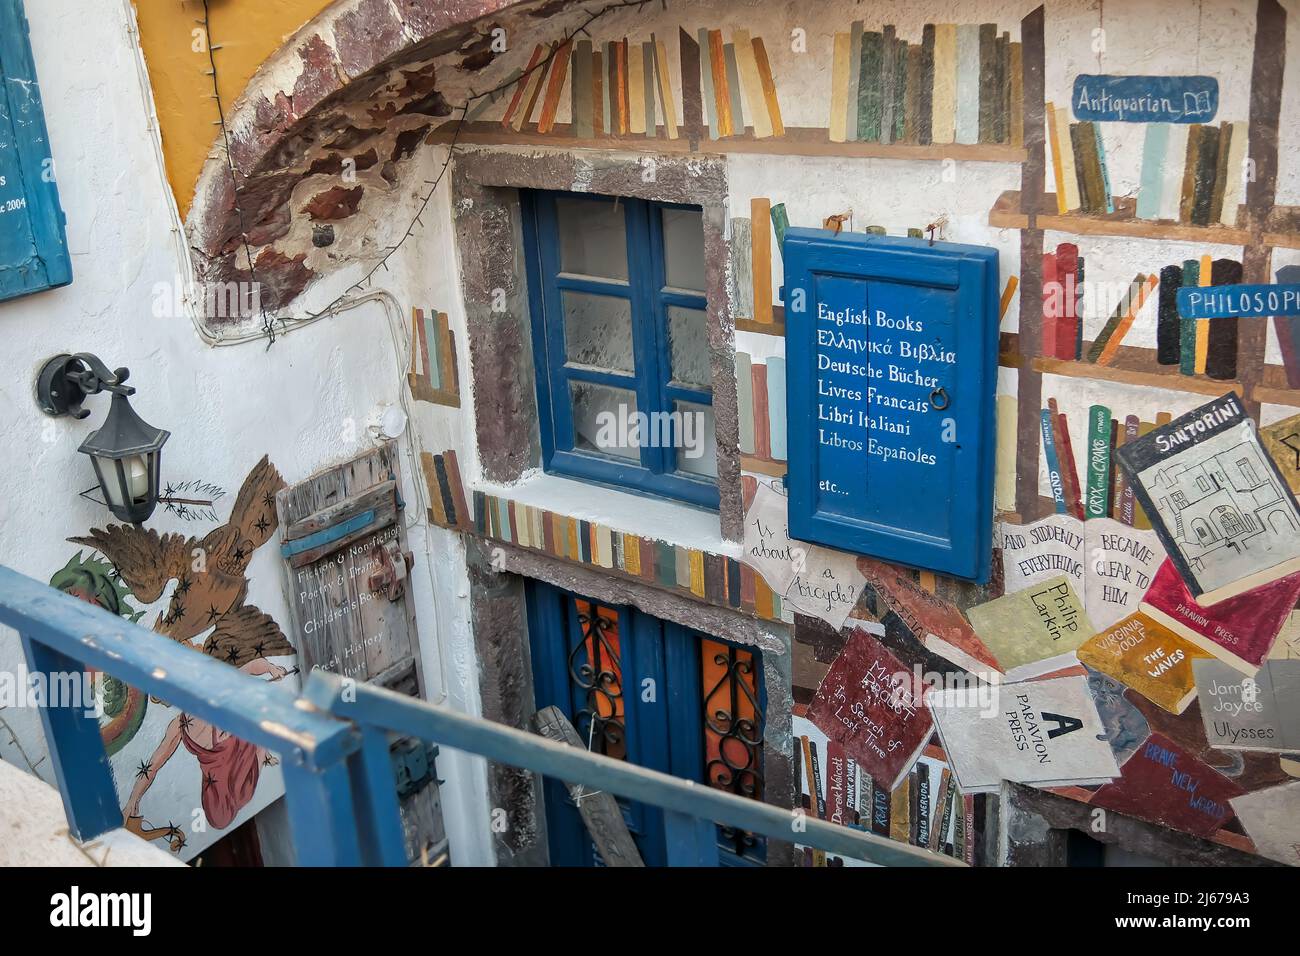 Oia, Greece - May 11, 2021 : The entrance of a traditional book store in the picturesque area of Oia in Santorini Stock Photo